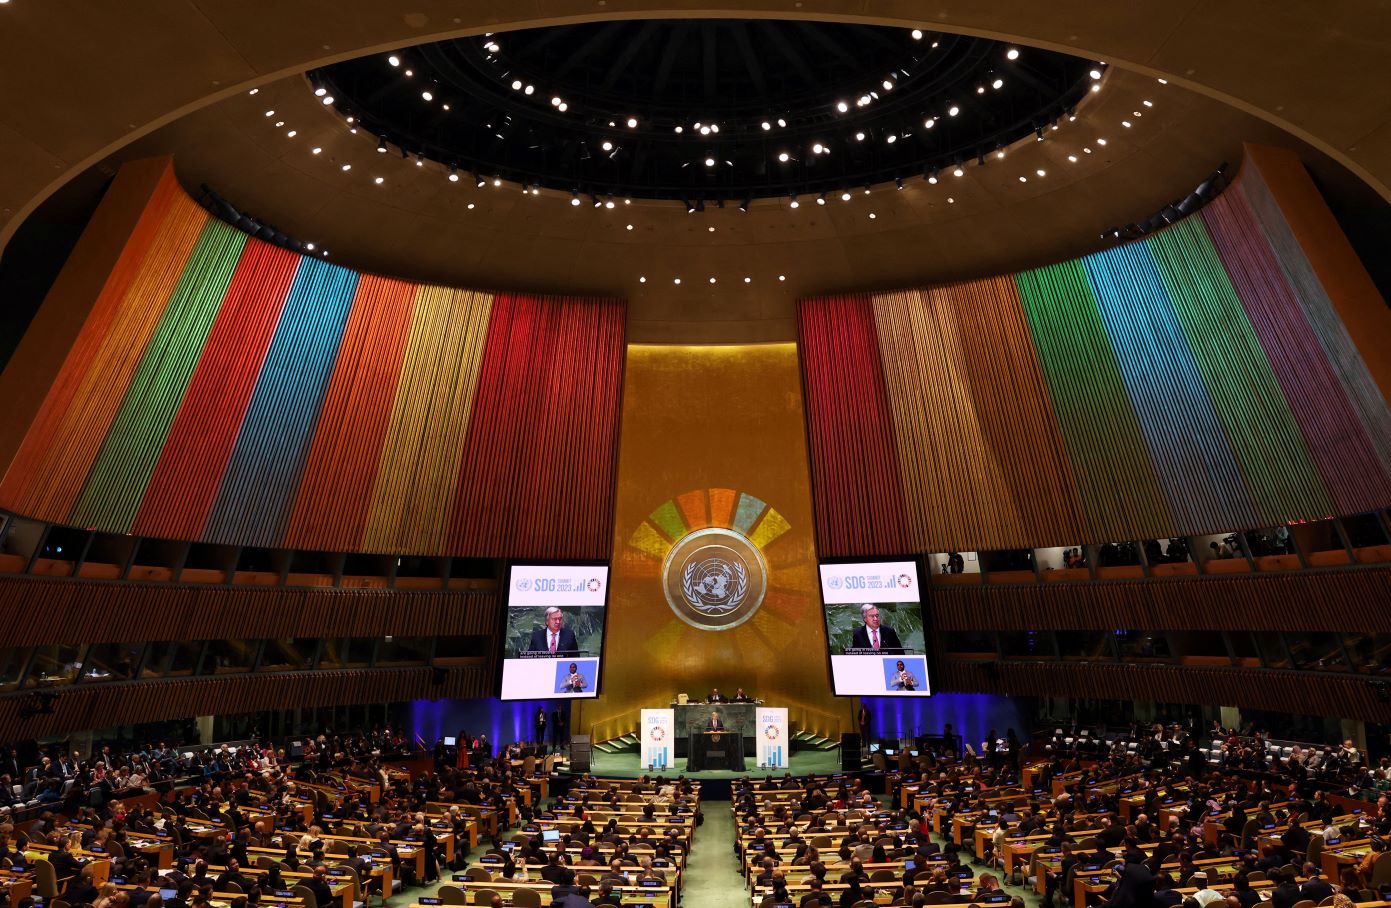 A broad shot of the opening of the Sustainable Development Goals (SDGs) Summit 2023 in New York in the large UN auditorium with colored streamers representing the SDGs hanging around the room on September 18, 2023. REUTERS/Mike Segar